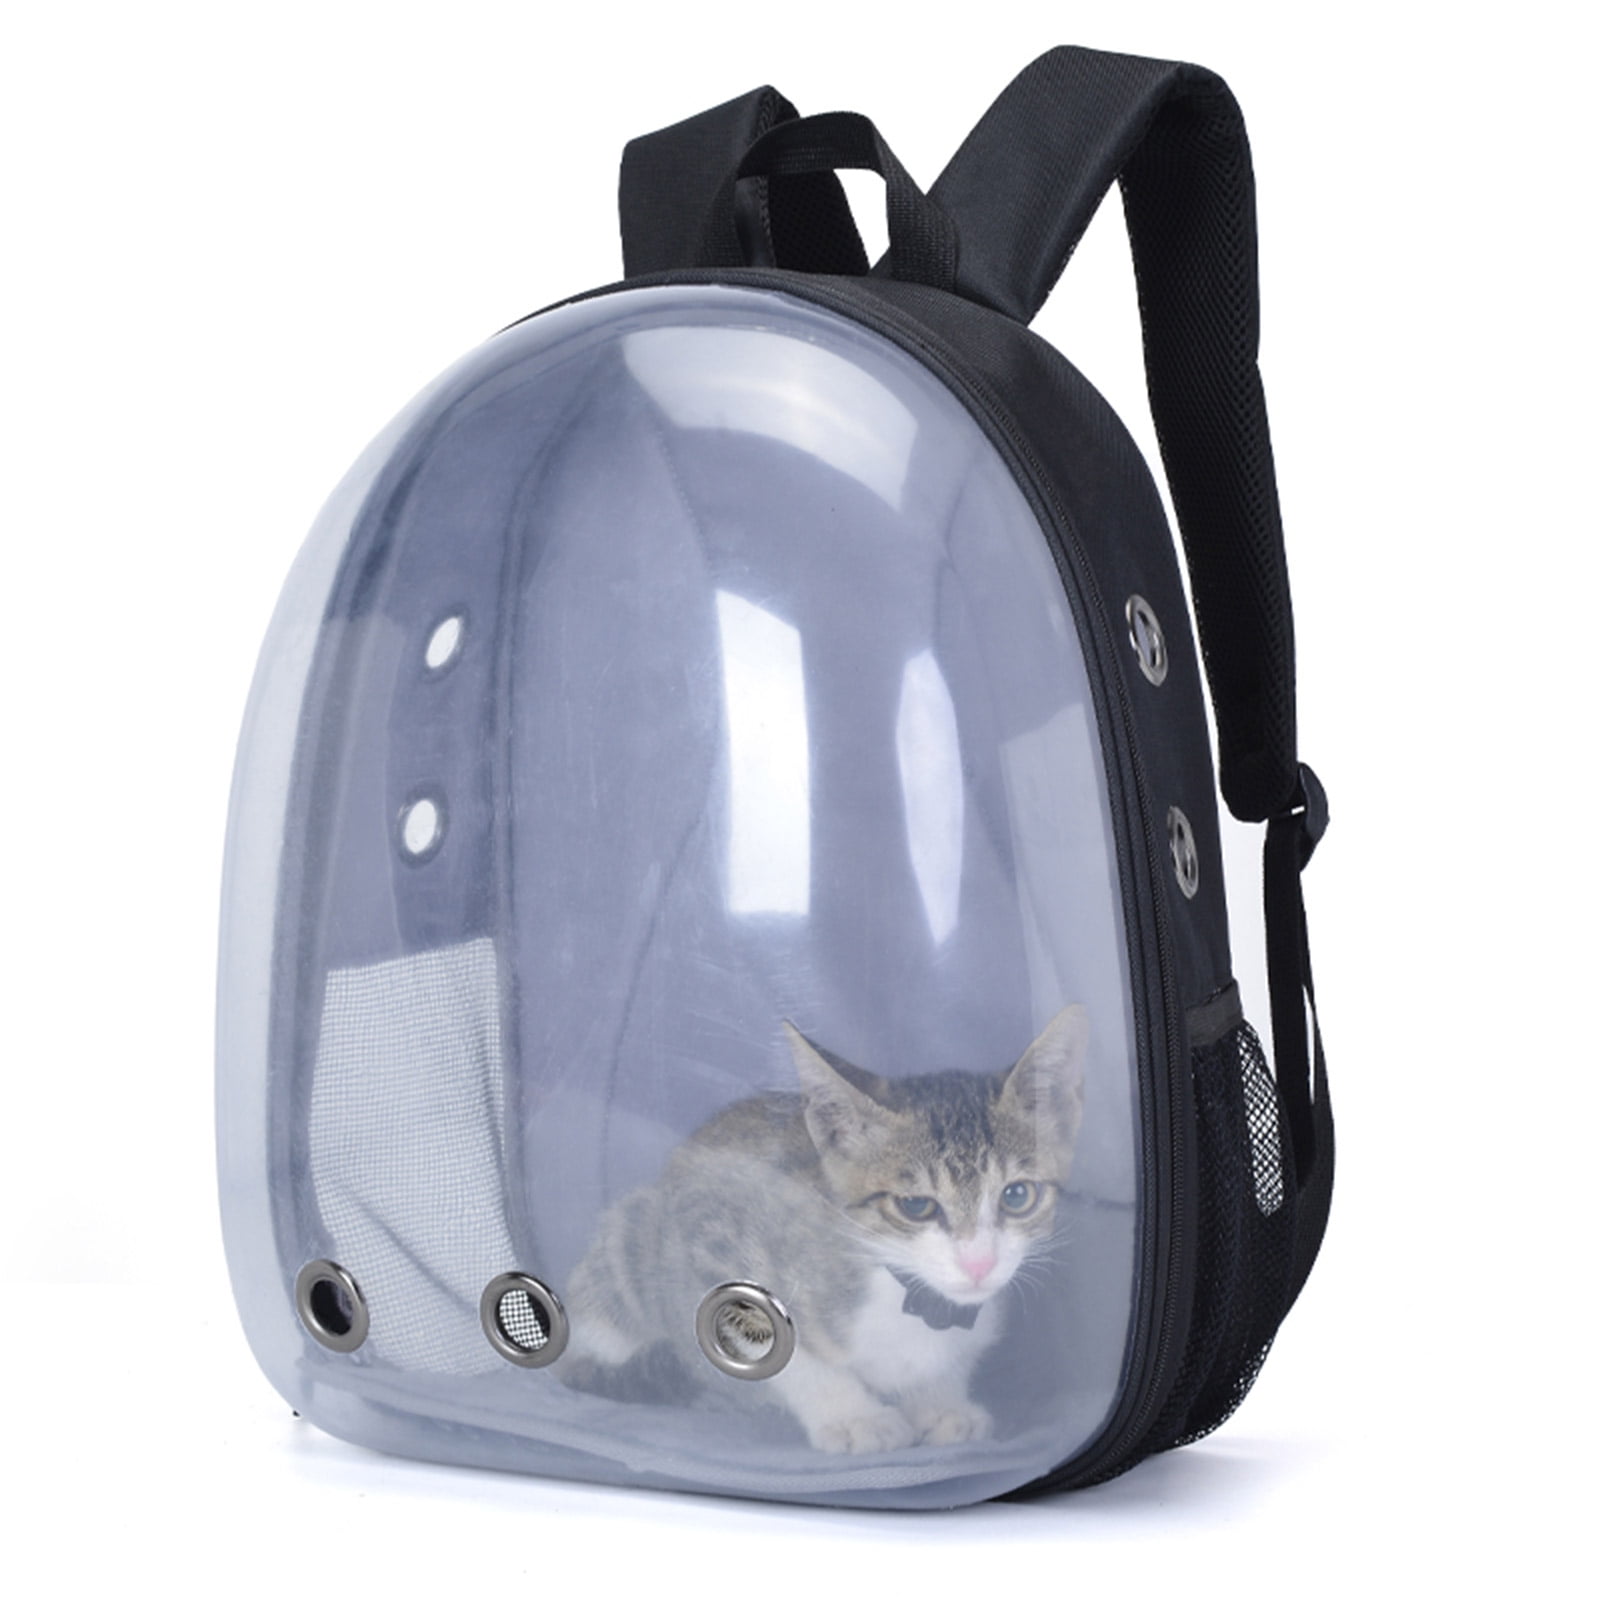 Ventilated Breathable Design Dog Cat Bag for Travel Hiking Camping Outdoor Green Style 1, Blue Pet Carrier Backpack for Small Dogs Cats BinetGo Dog Backpack Cat Carrier with Bubble